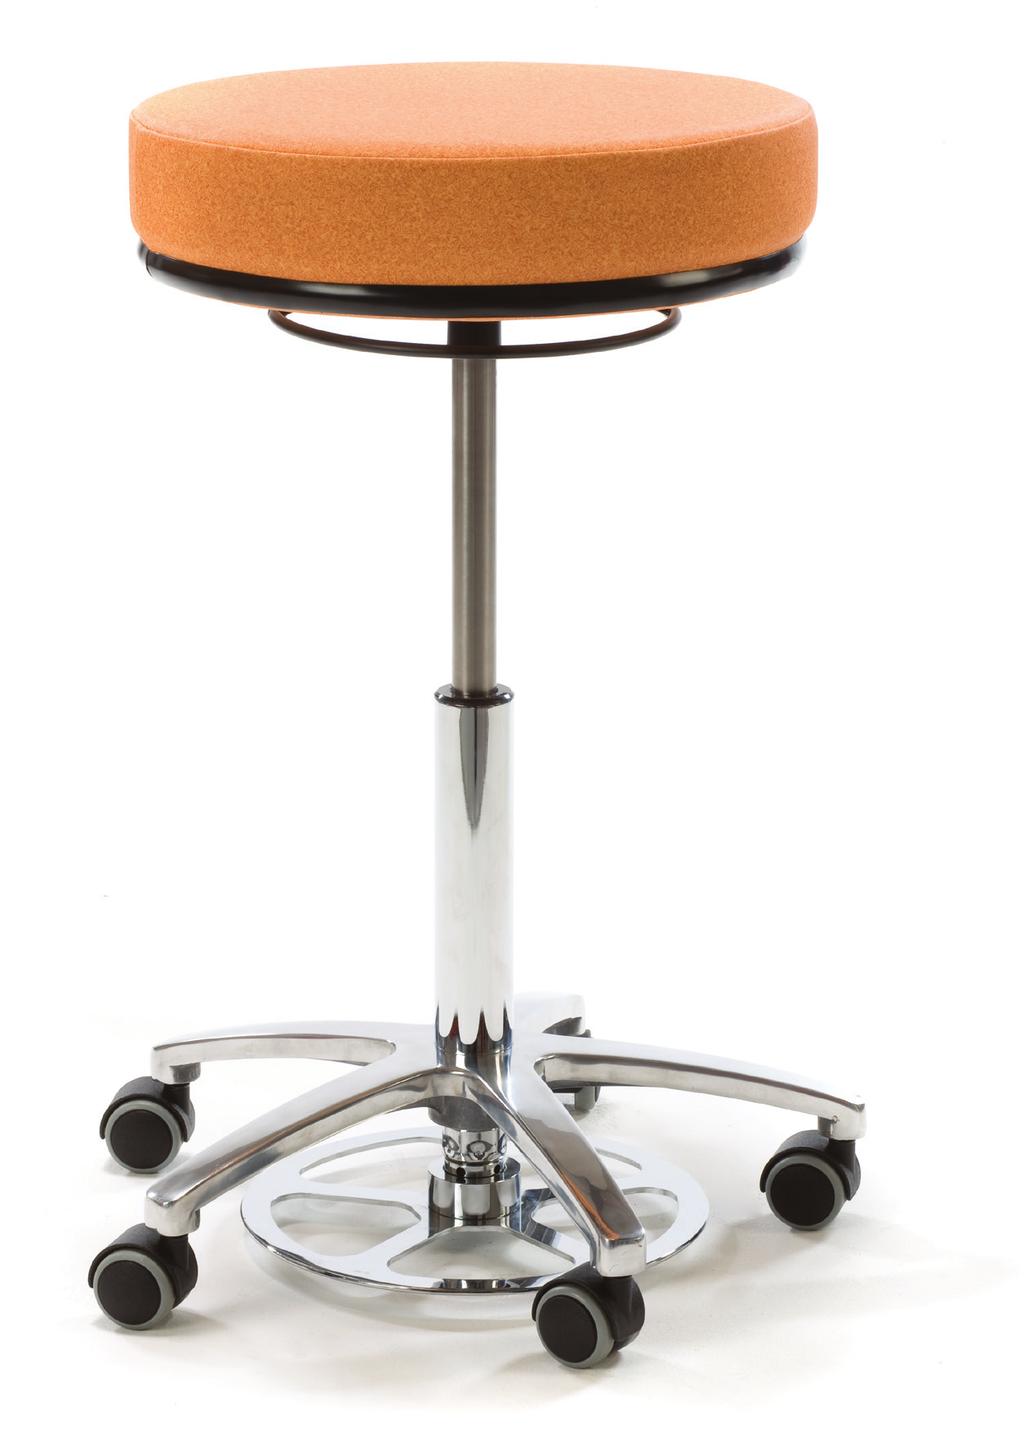 MEDIC Round Medical Stools 150Kg The clinical stool range has been designed to offer the clinician a variety of seat options, promoting optimum